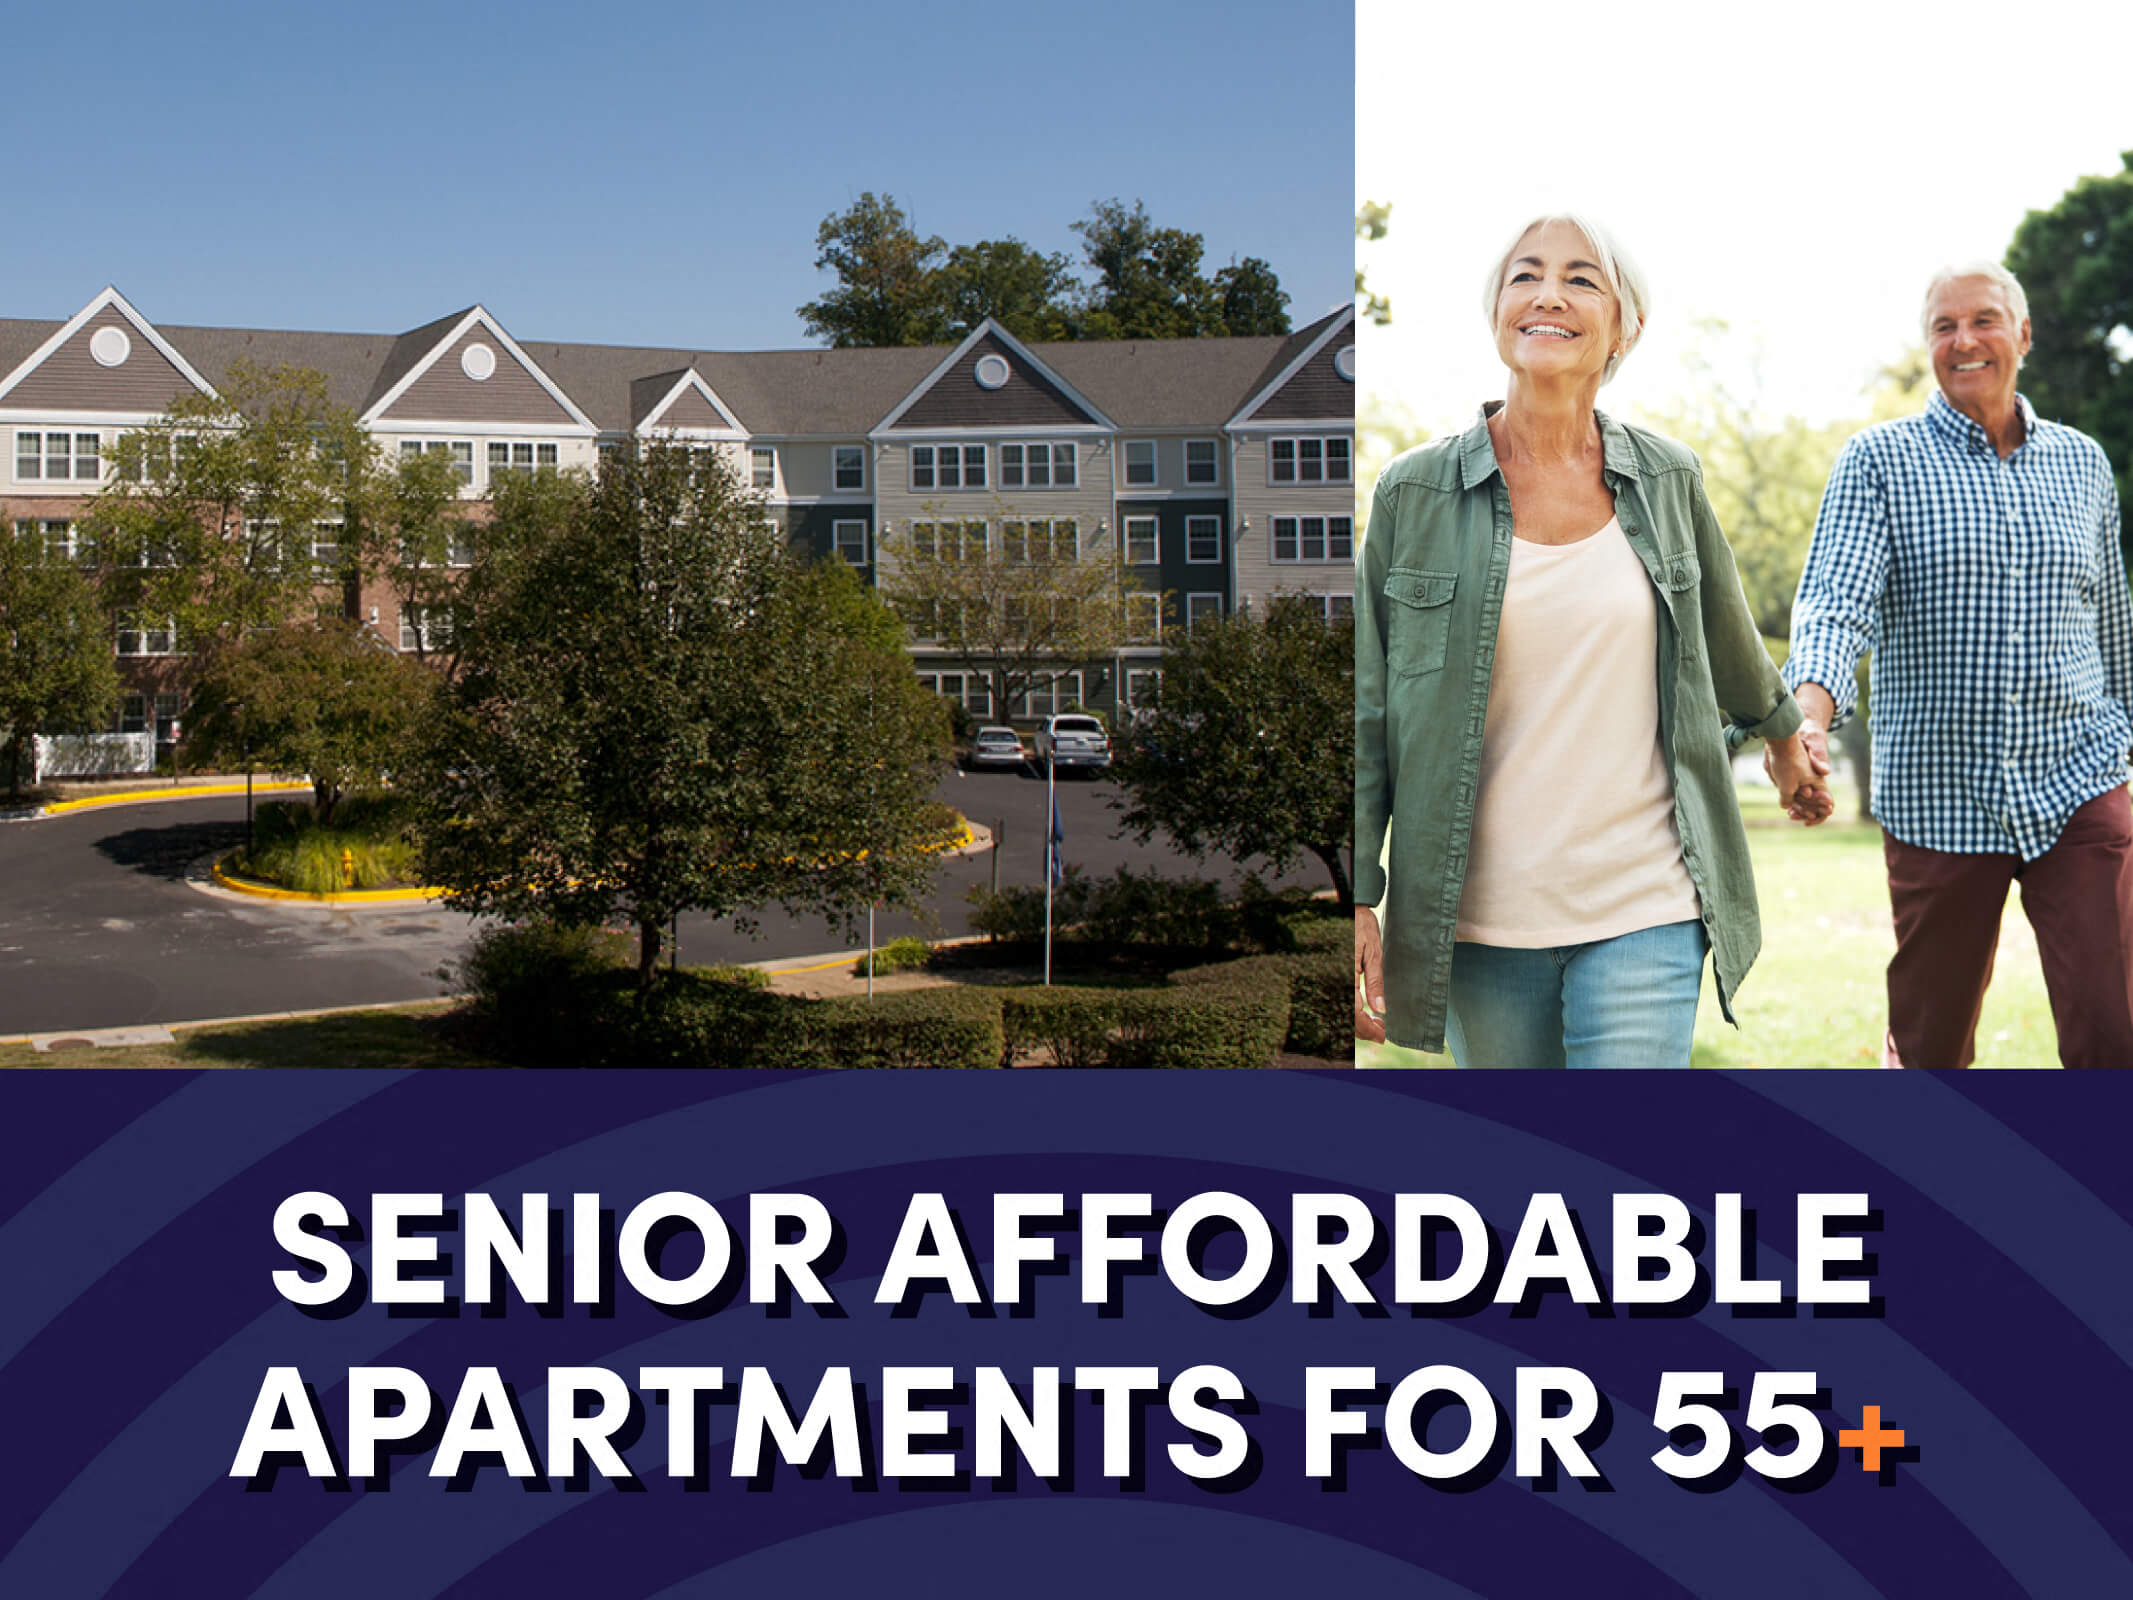 An image of the building exterior, an image of a senior couple holding hands, and text at the bottom that reads “Senior Affordable Apartments for 55+” at the Victoria Park and Woods at Victoria Park Apartments in Woodbridge, Virginia.